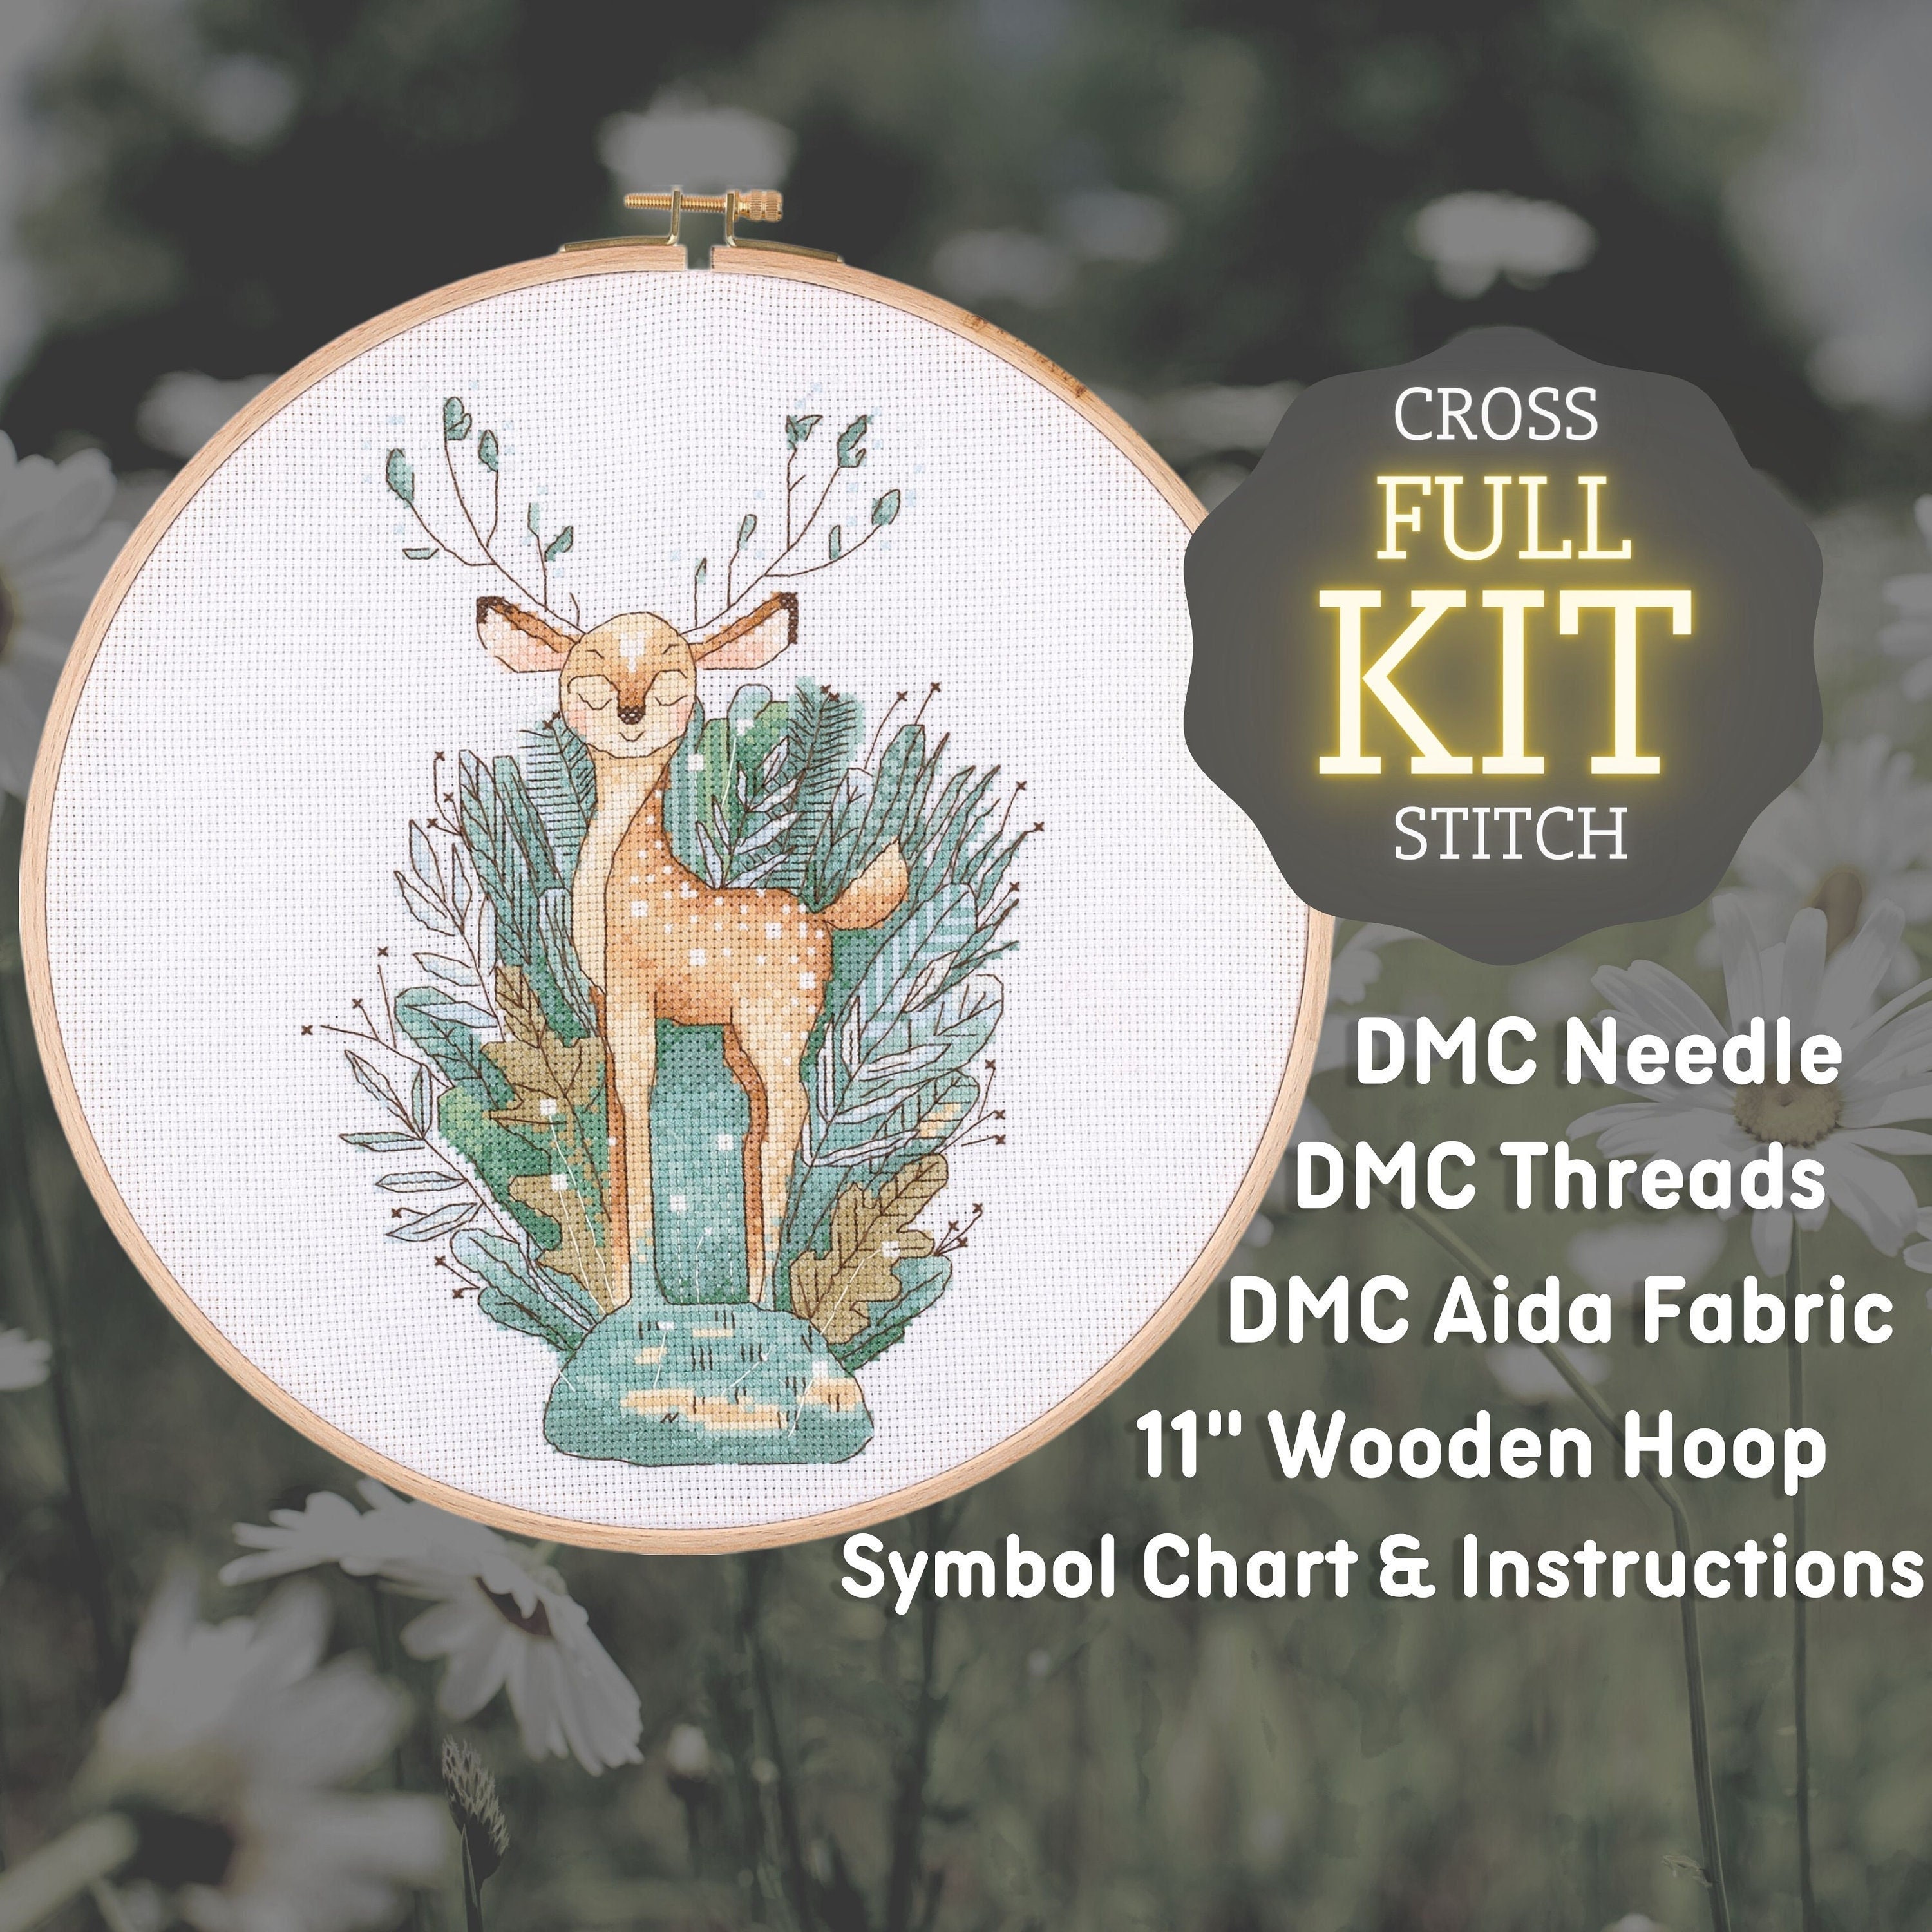 Maker Susan Whirligig Counted Cross Stitch Kits for Adults and Beginners  with Wooden Hoop, DMC Fabric, Threads and Needles, Embroidery Thread Floss